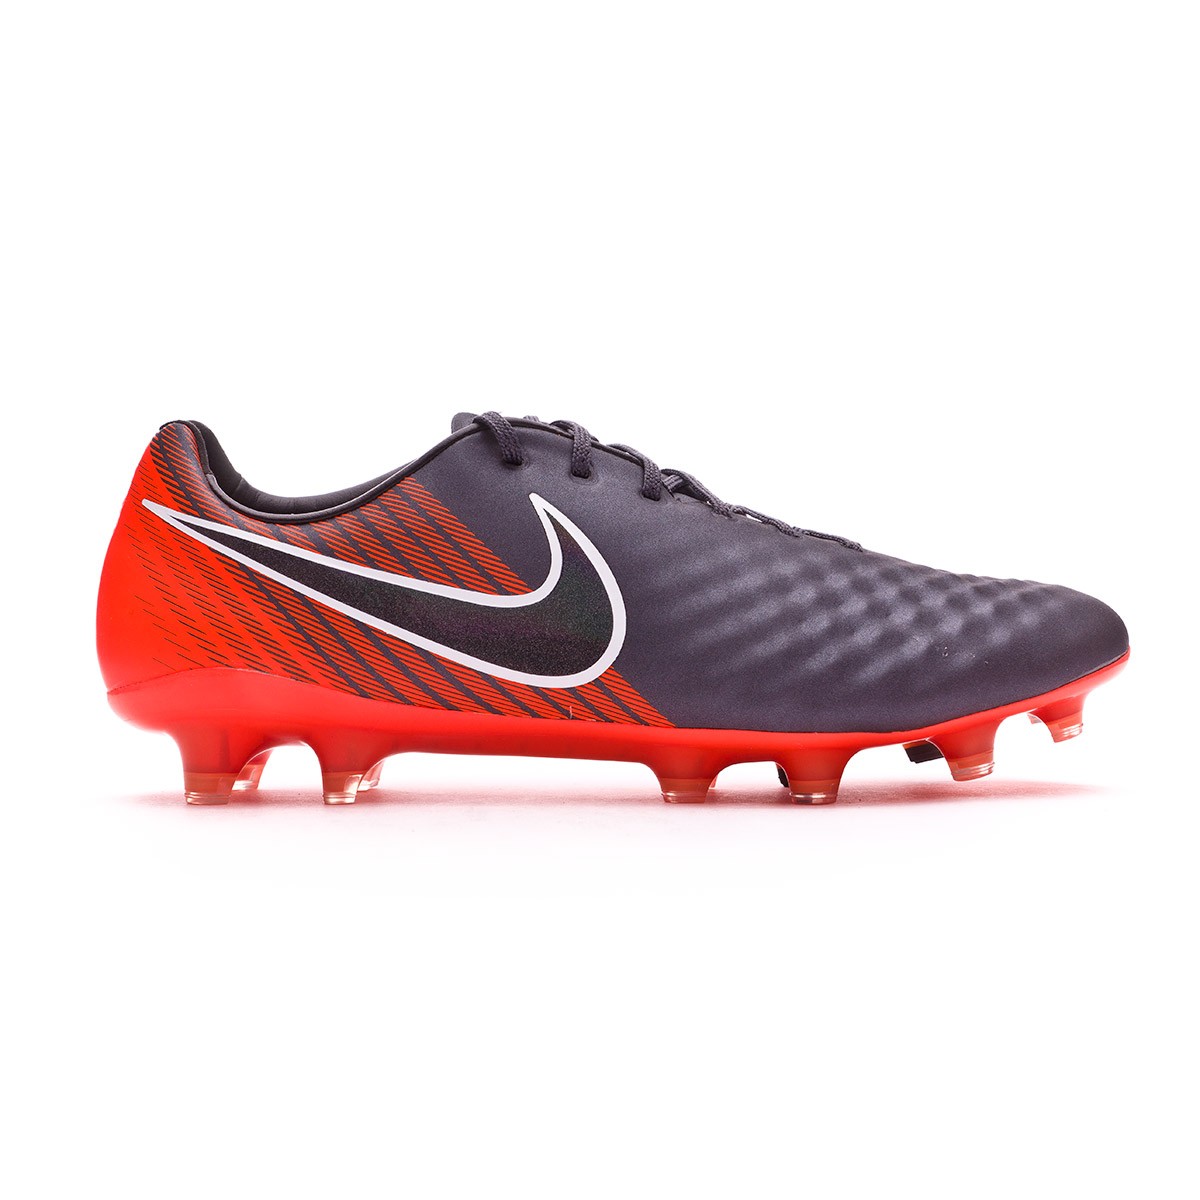 Foot Chaussure Ii Proximo Nike Tf Magistax Synthétique